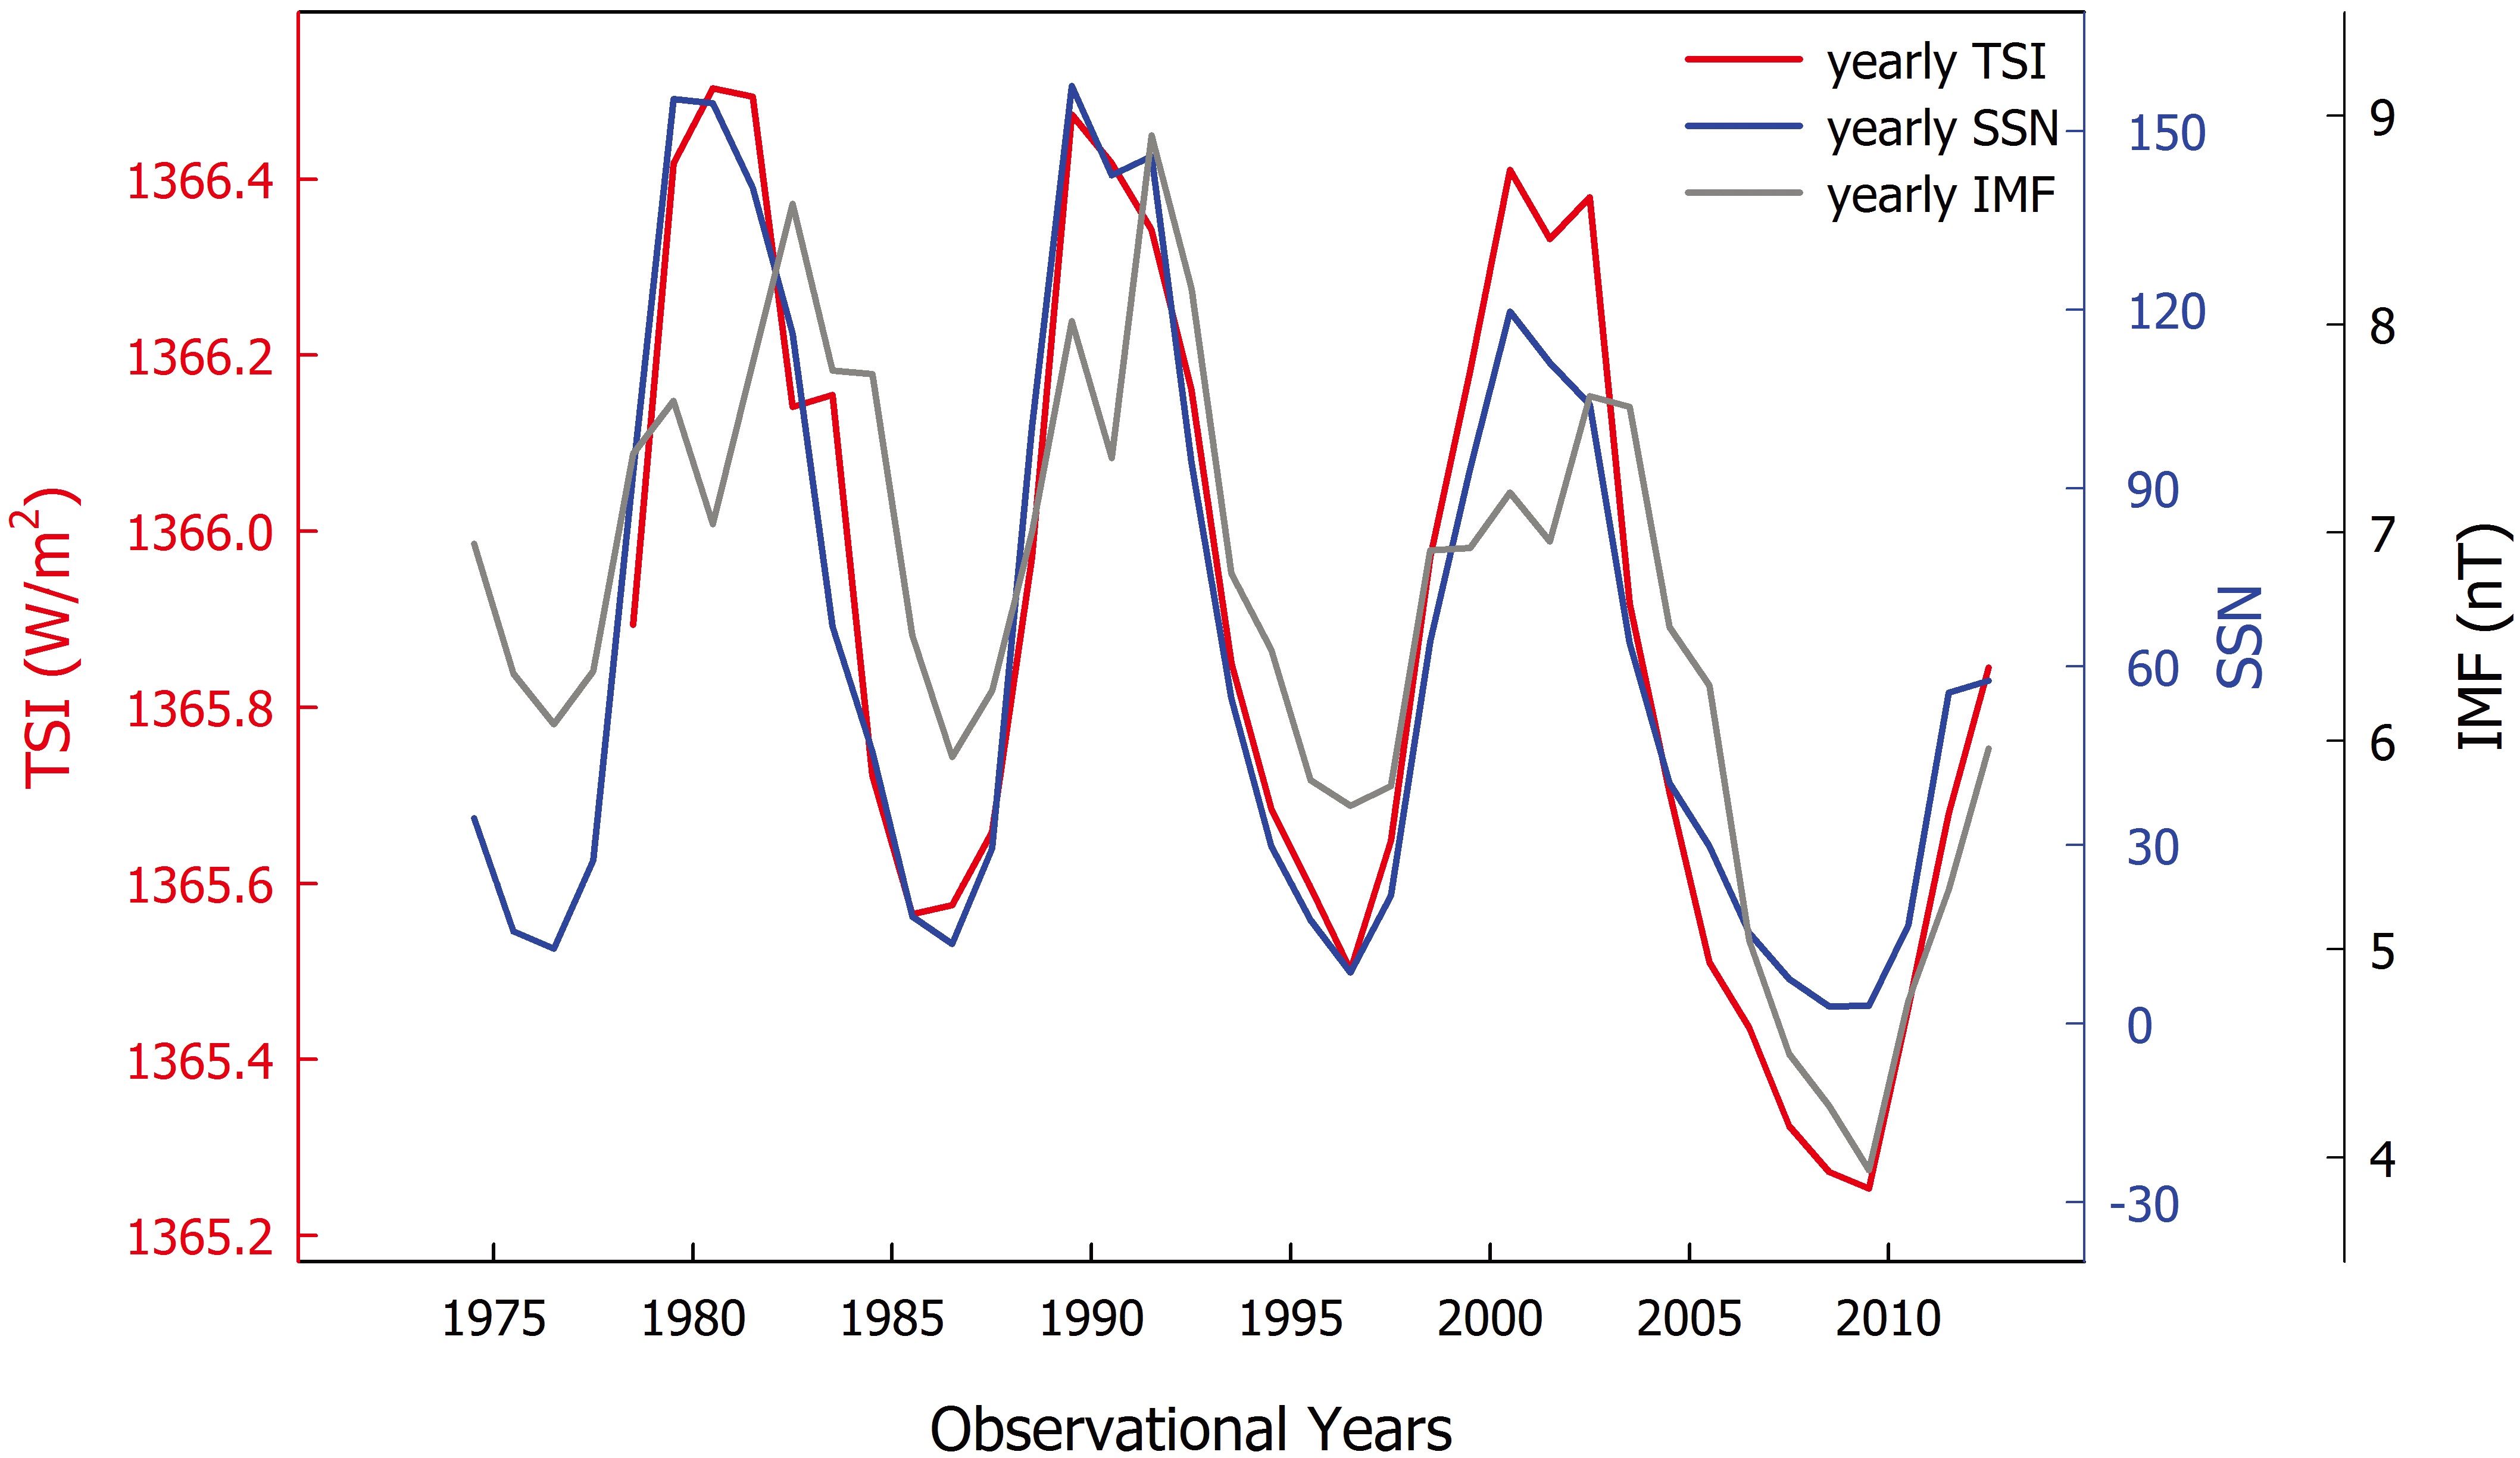 Yearly means of TSI (red line), SSN (blue line), and IMF (dark grey line).